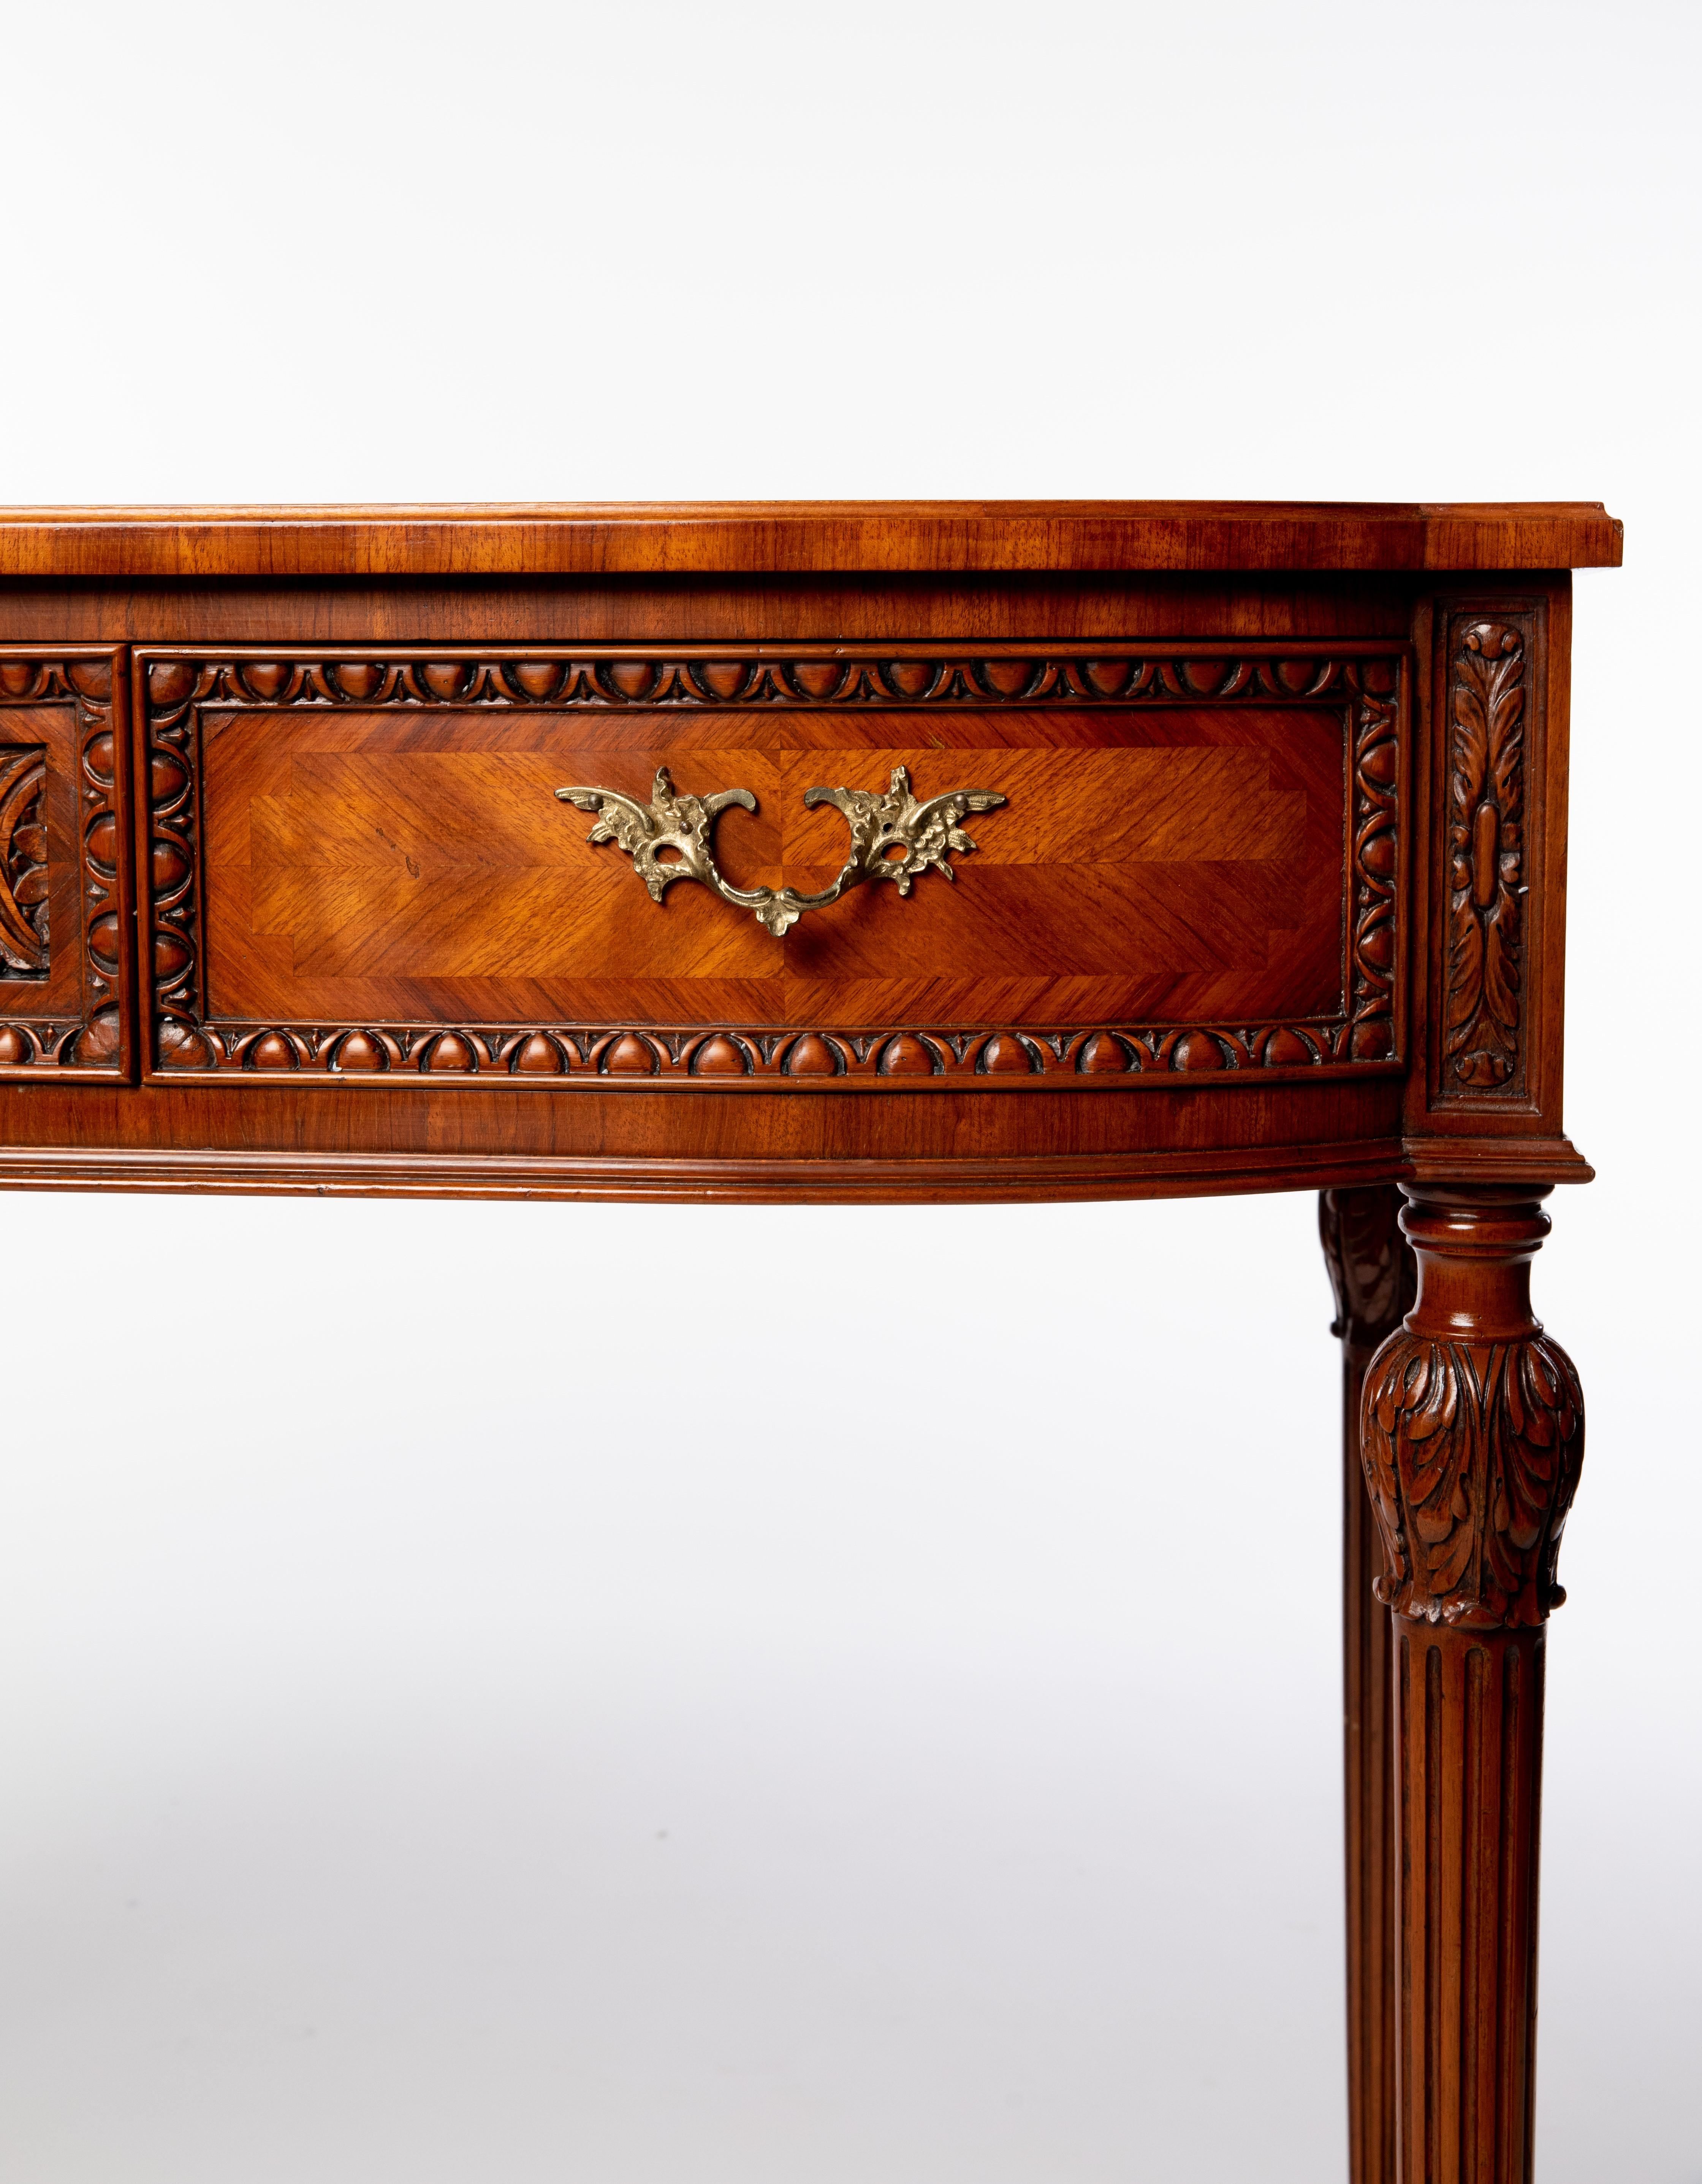 Carved mahogany console table, late 20th c., matched veneer top with banded inlay, over two drawers, rising on fluted tapered legs with carved acanthus caps.